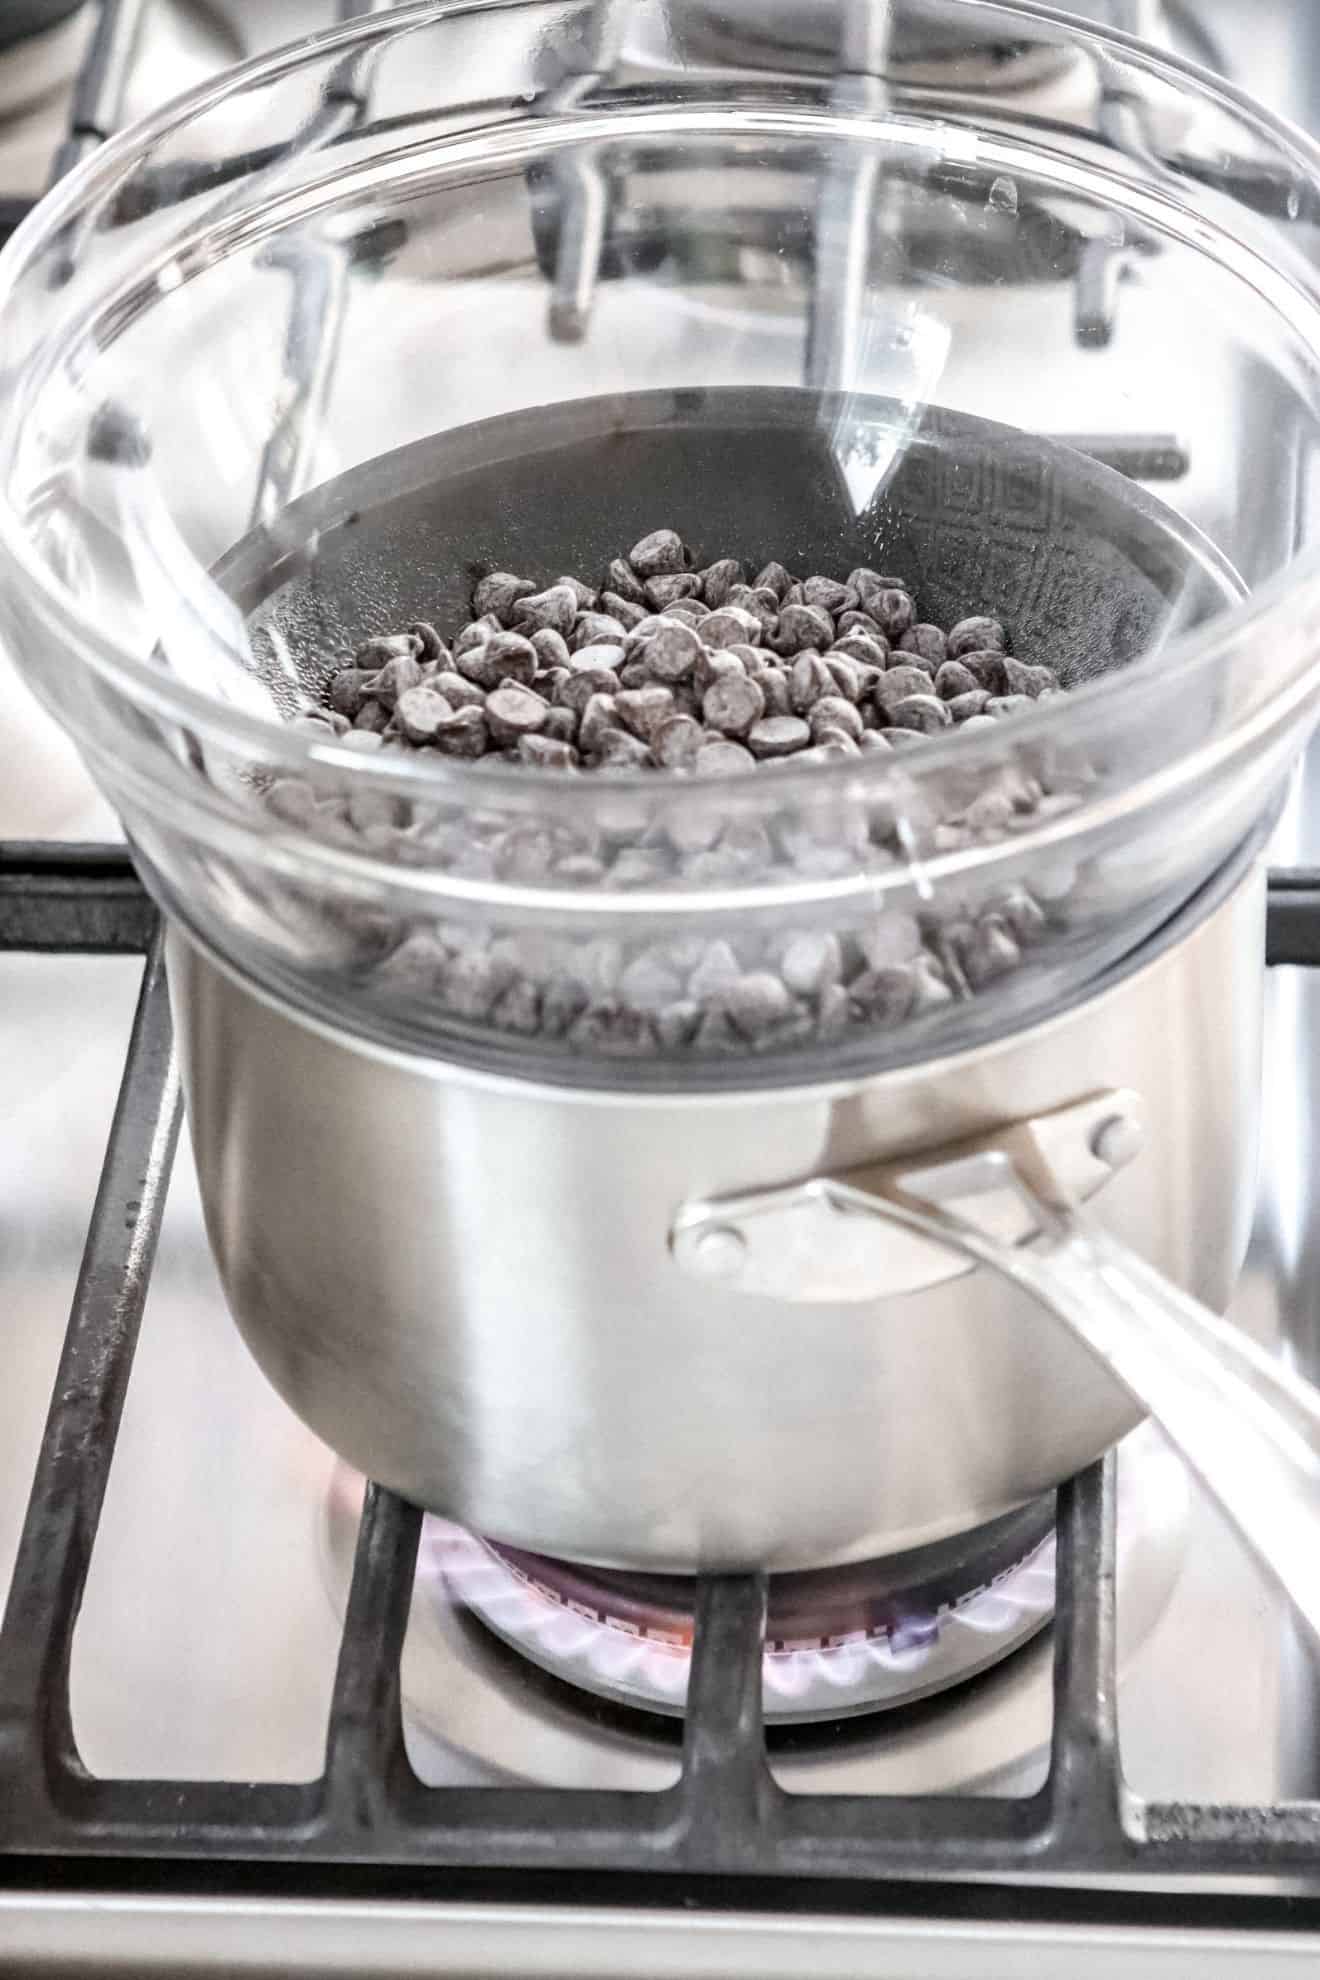 This is a side view of a stainless steel pot on a stove over a flame with a glass bowl on top. In the glass bowl are chocolate chips.